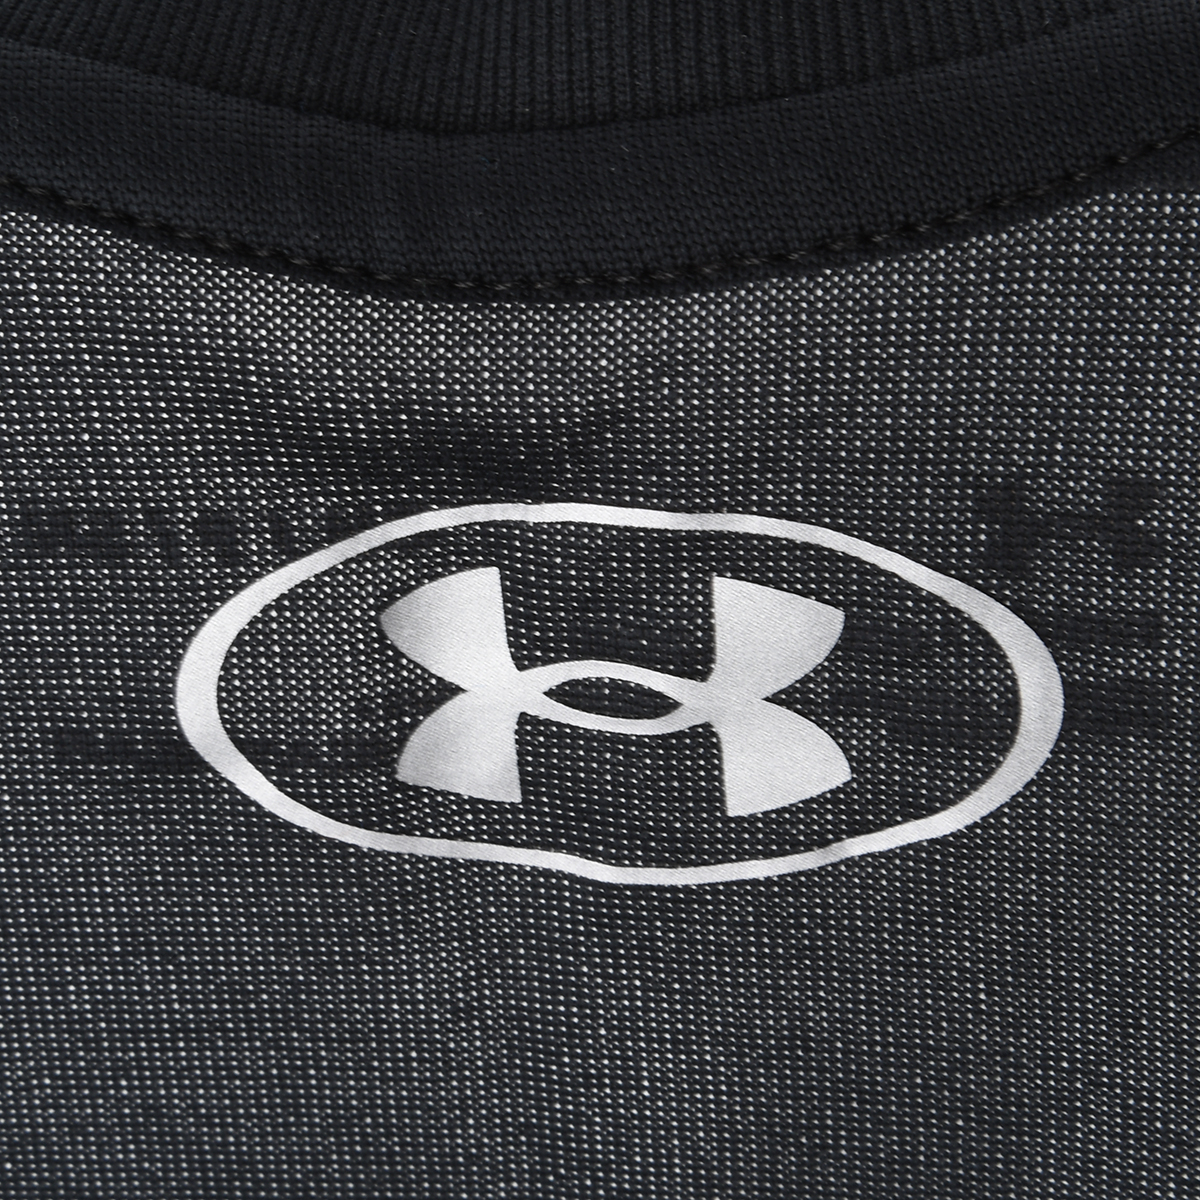 Musculosa Training Under Armour Tech Mujer,  image number null